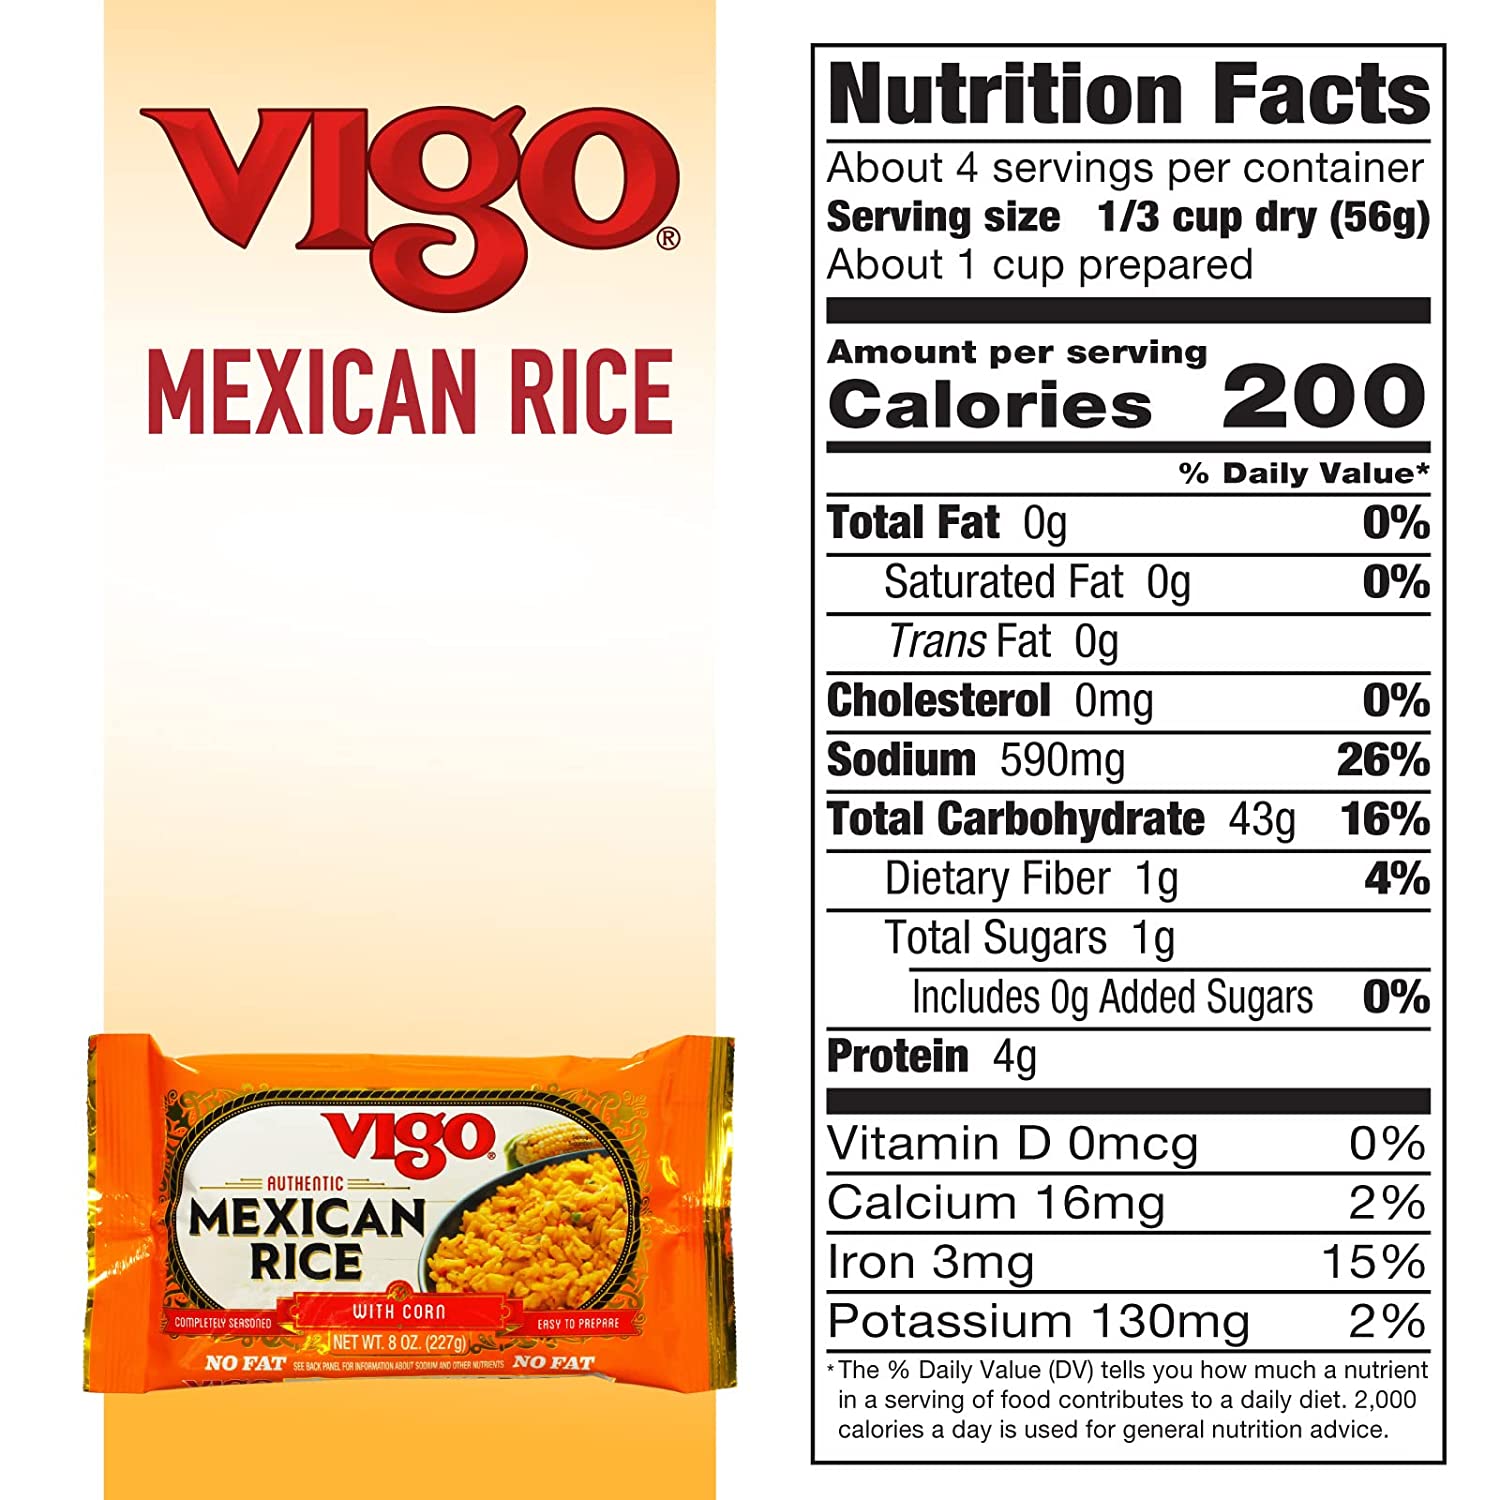 Vigo Authentic Mexican Rice with Corn, No Fat, 8oz (Pack of 12)